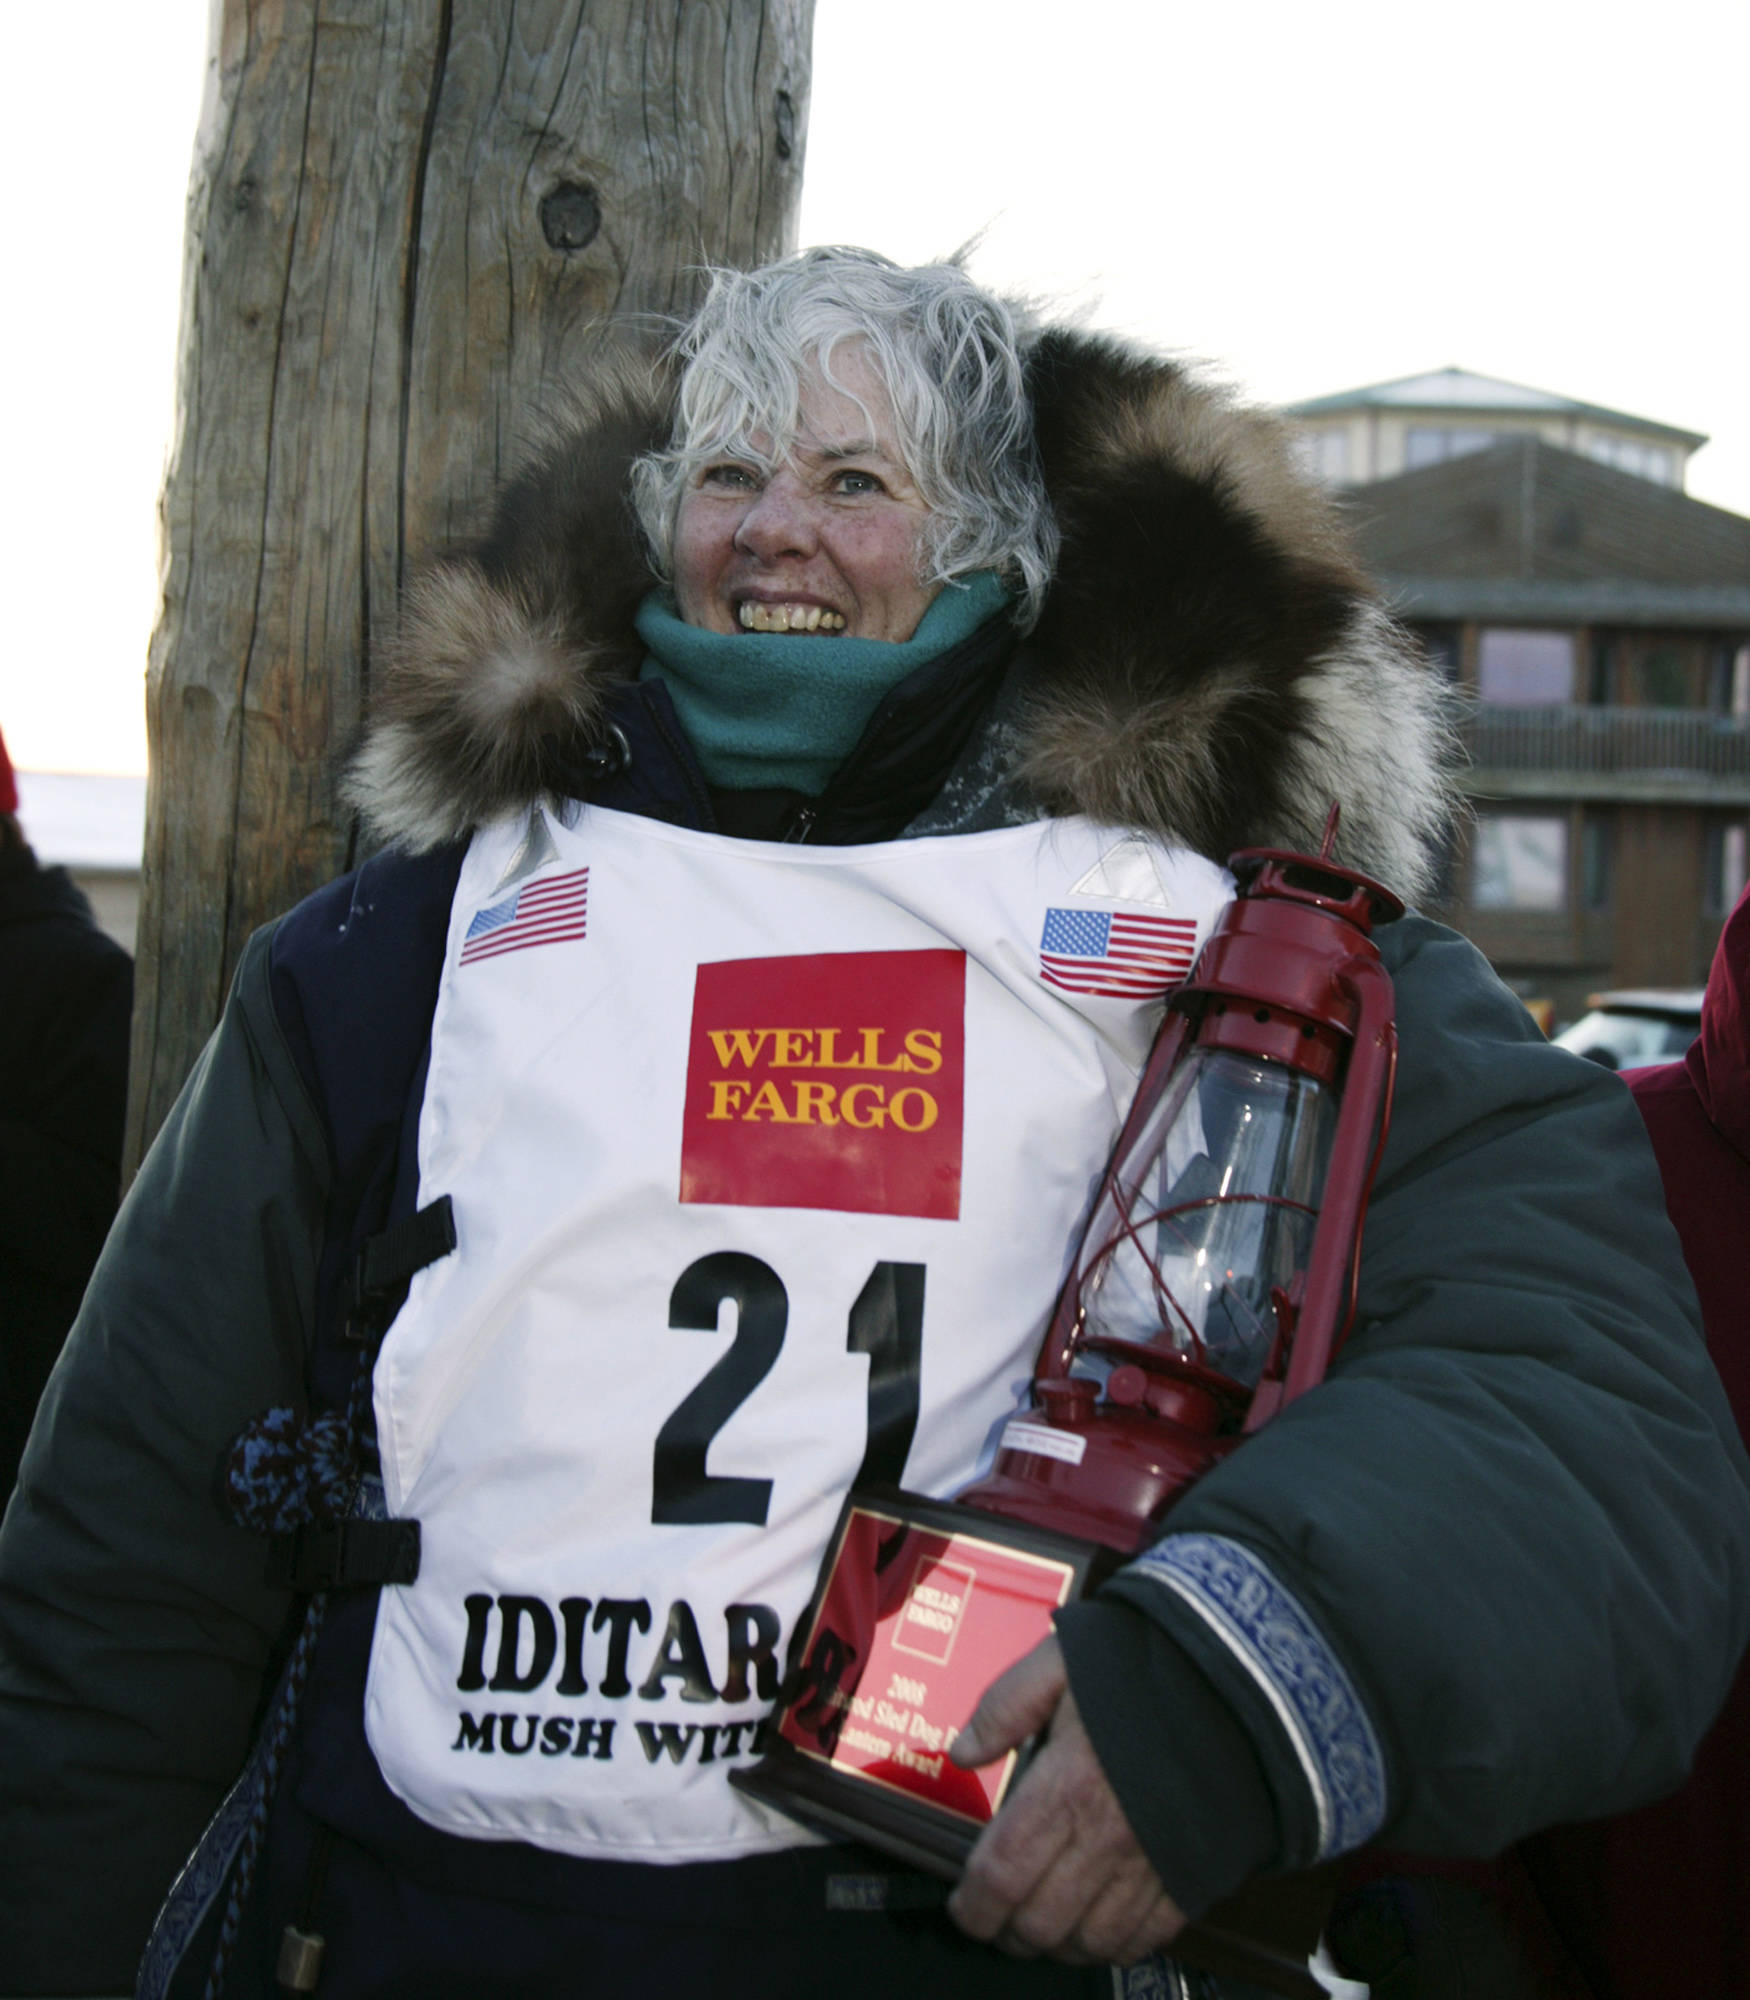 FILE - This March 17, 2008, file photo, shows Deborah Bicknell from Juneau, Alaska wearing a Wells Fargo bib and posing with the “Widow’s Lamp” which is lit at the beginning of the Iditarod Trail Sled Dog Race and is blown out by the last musher to the end of the sled dog race in Nome, Alaska, signifying that the race is over. Wells Fargo has dropped its sponsorship of the world’s most famous sled dog race, a move race officials have blamed on animal rights groups targeting corporate offices outside Alaska. (AP Photo/Peggy Fagerstrom, File)